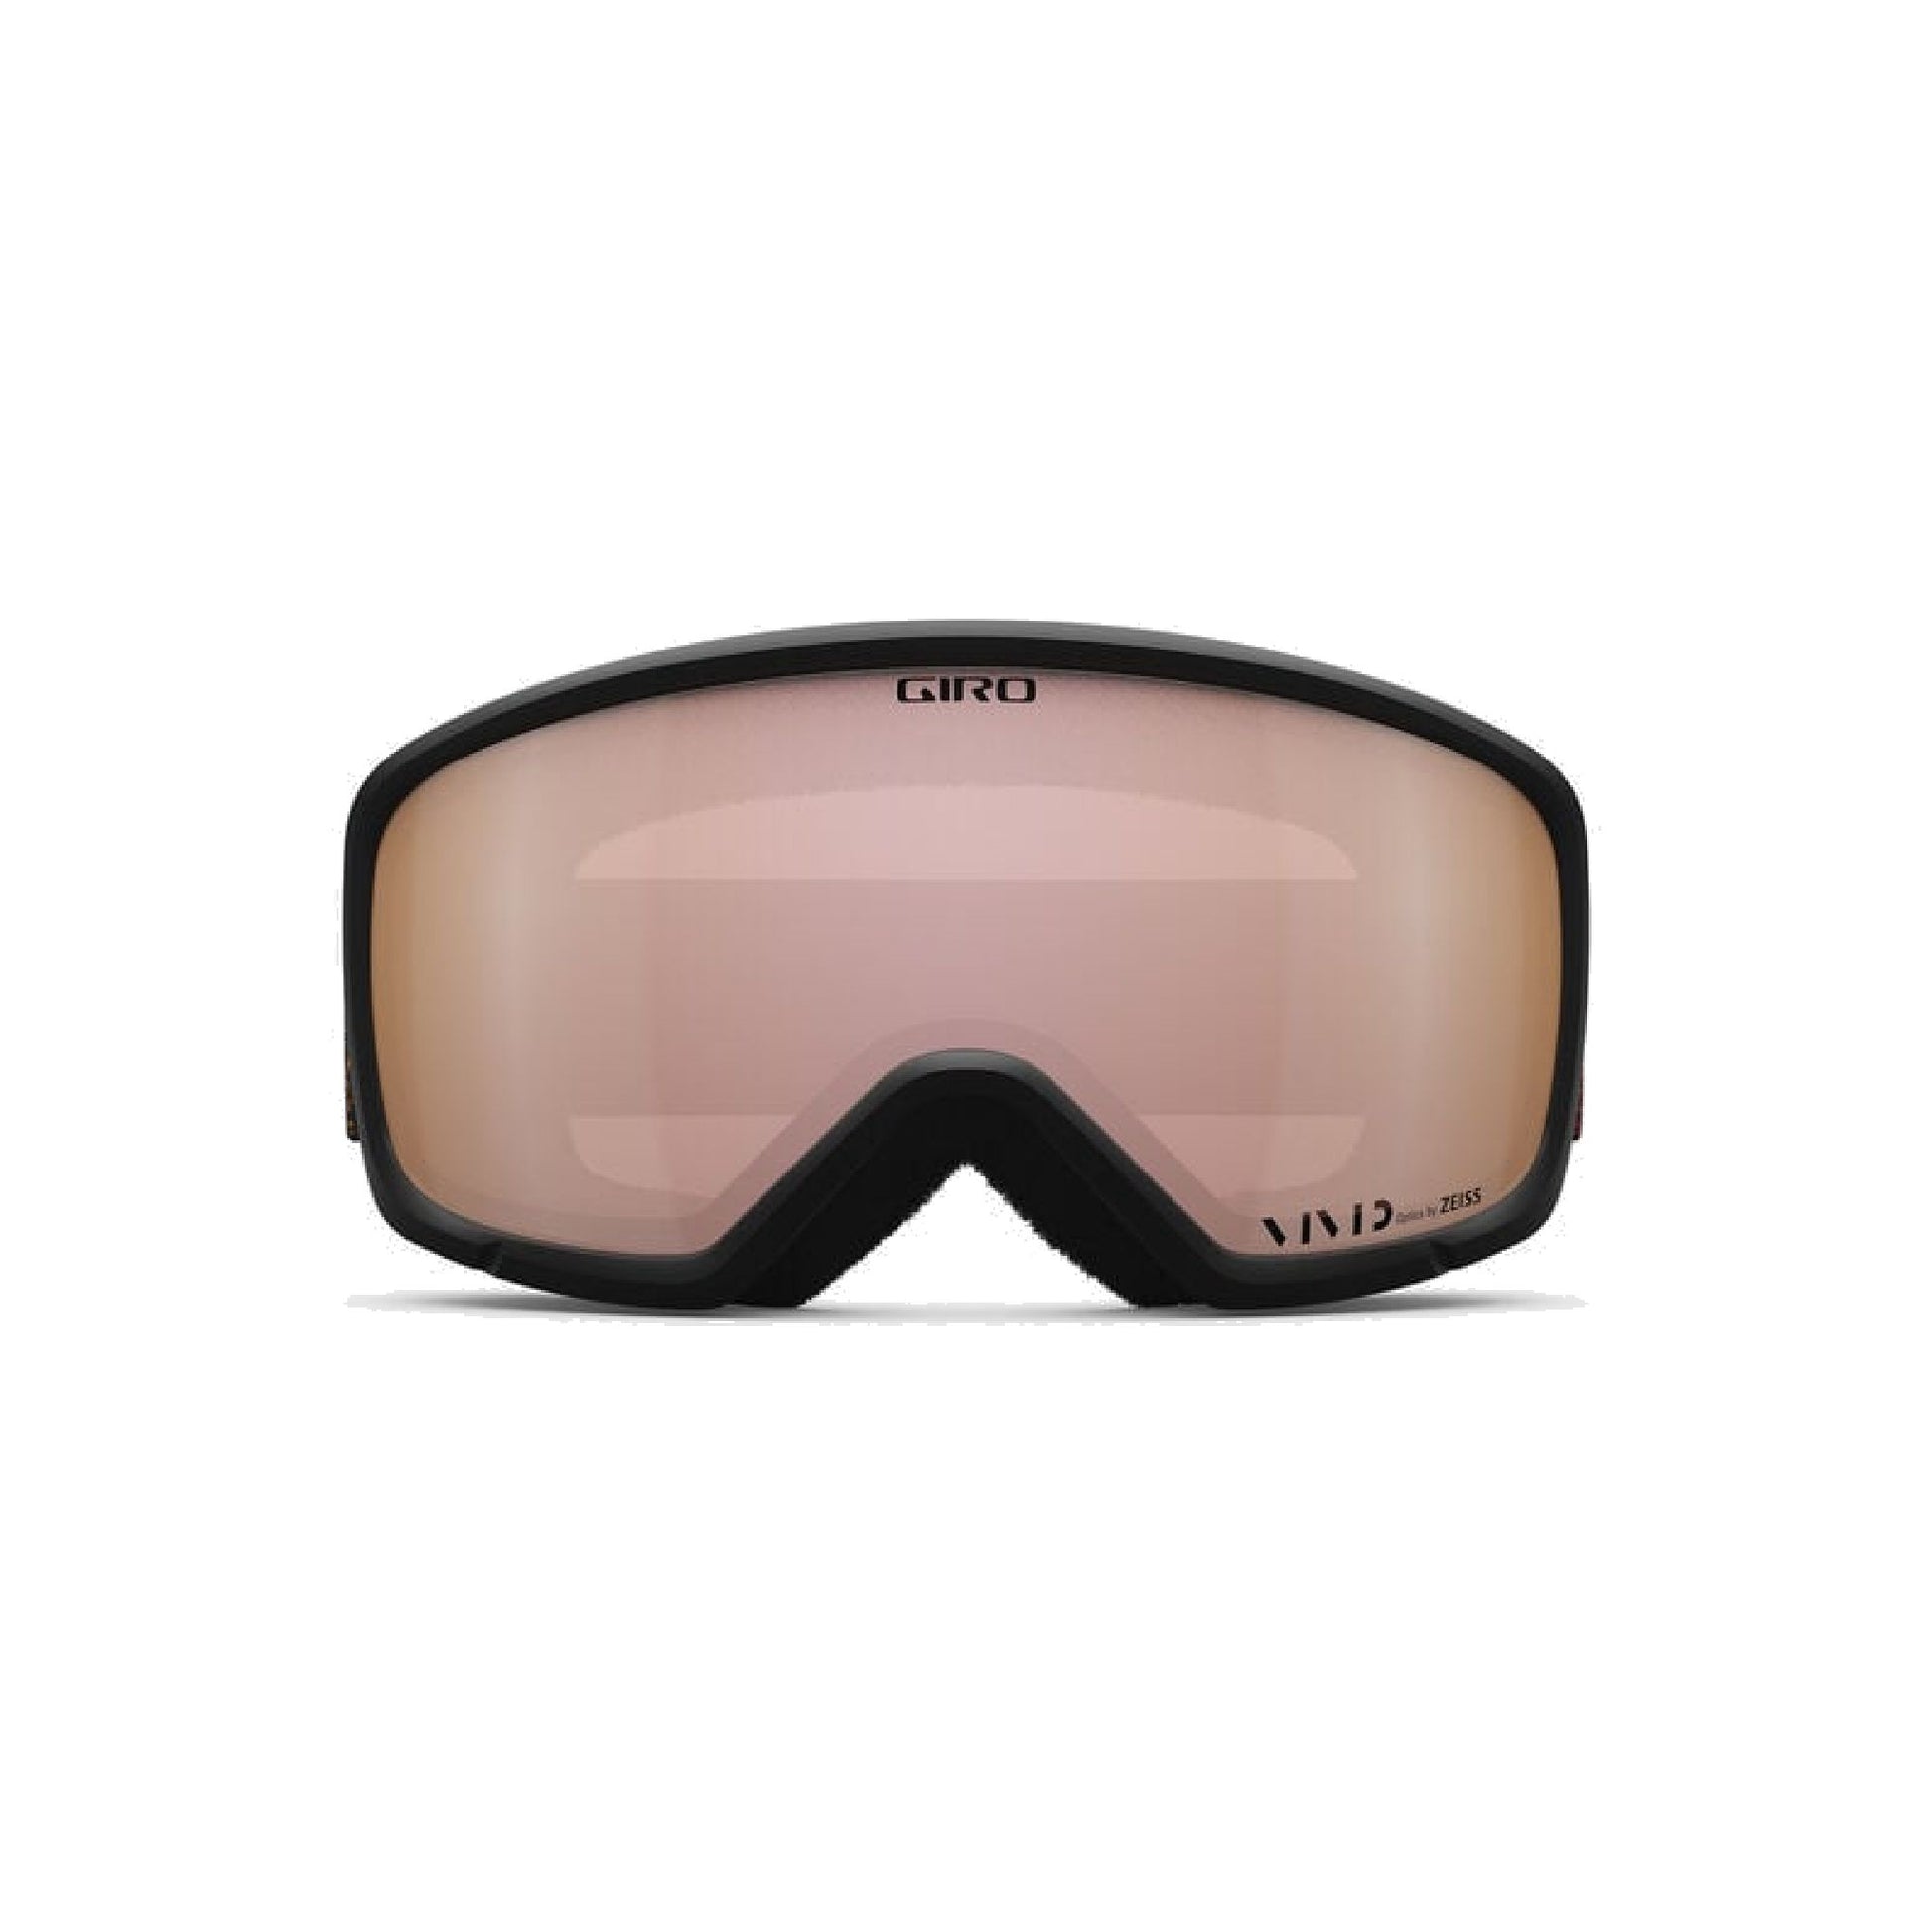 Giro Women's Millie Snow Goggles Tiger Lily Monarch Orange Expedition Vivid Rose Gold Snow Goggles